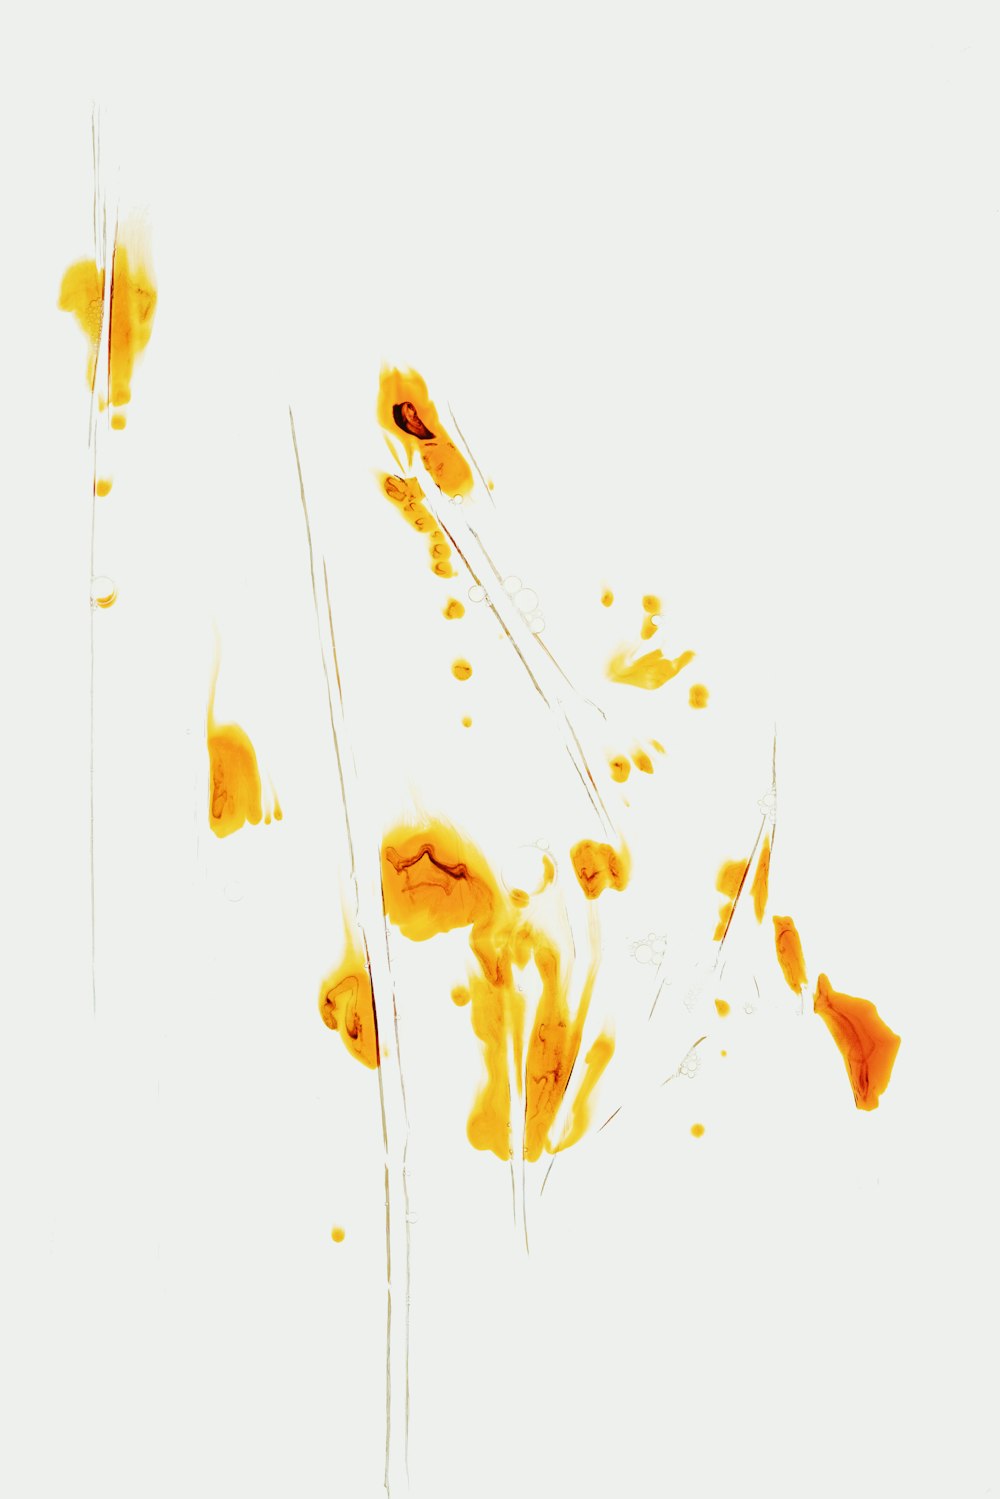 a group of yellow flowers blowing in the wind